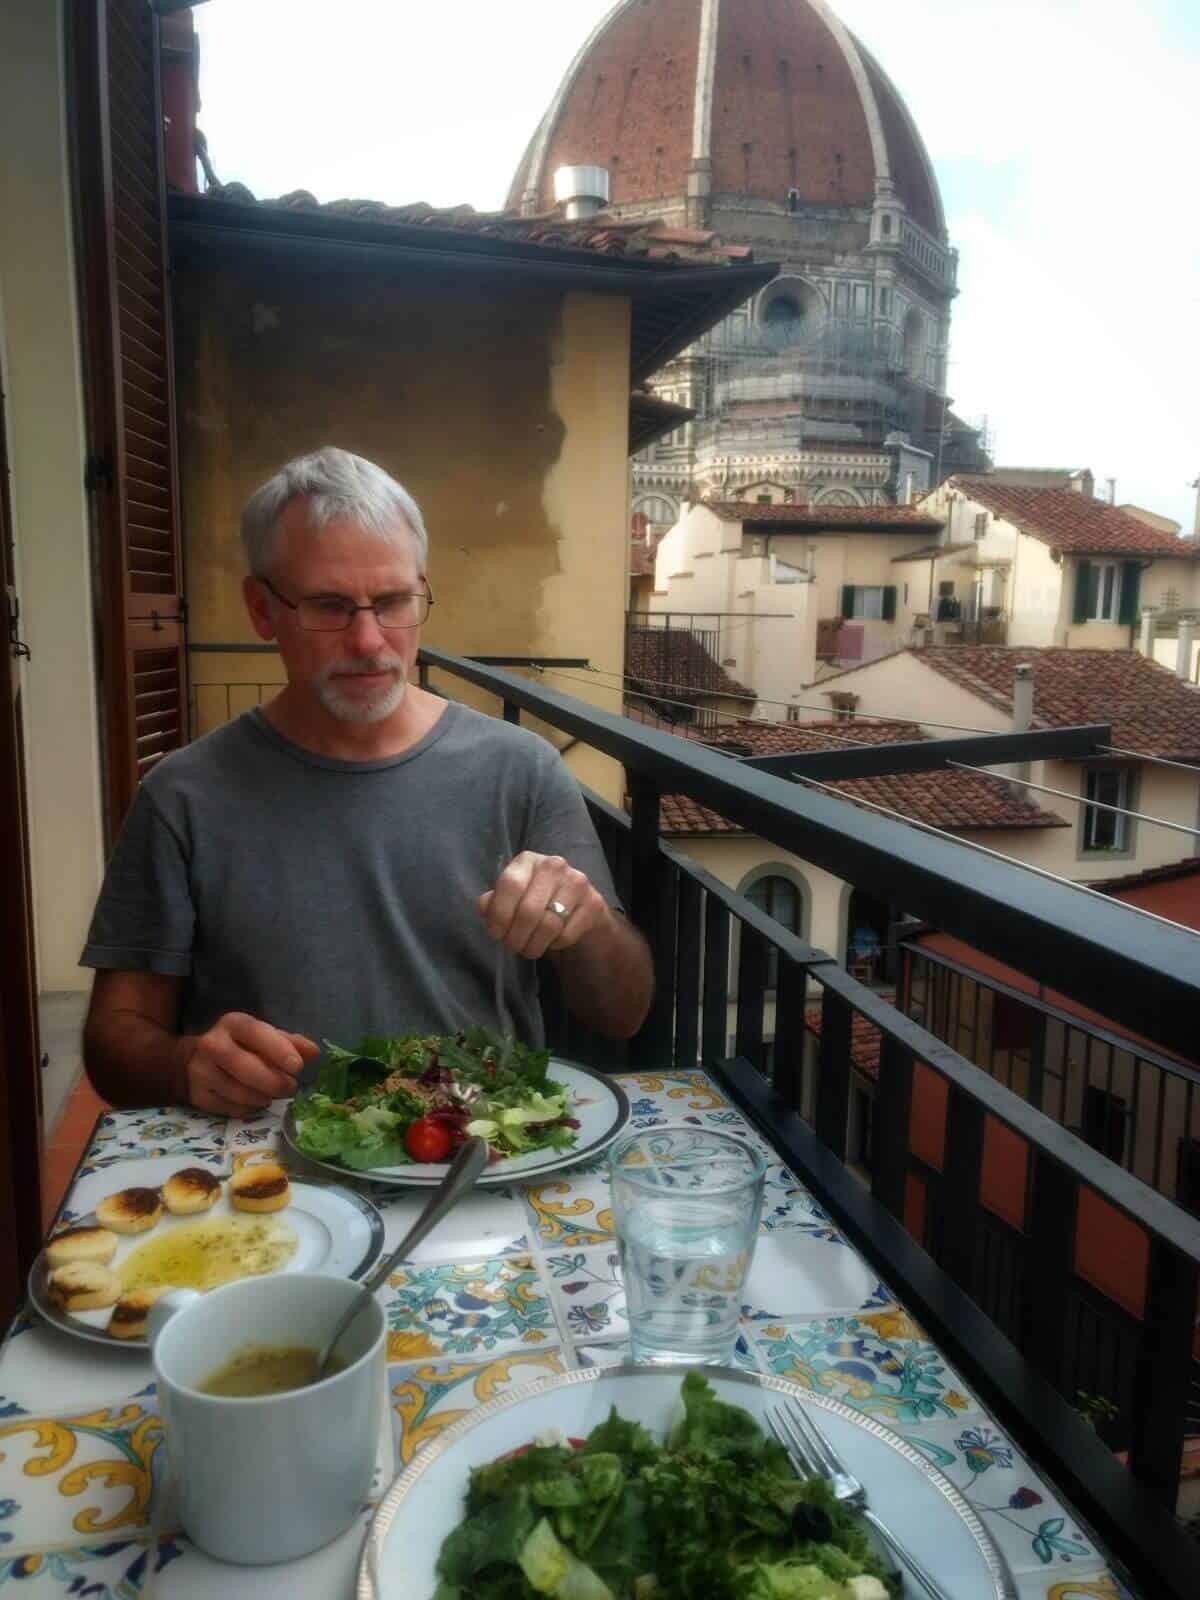 Man with grey hair eating a salad on a small balcony with the Florence Duomo dome in the background.